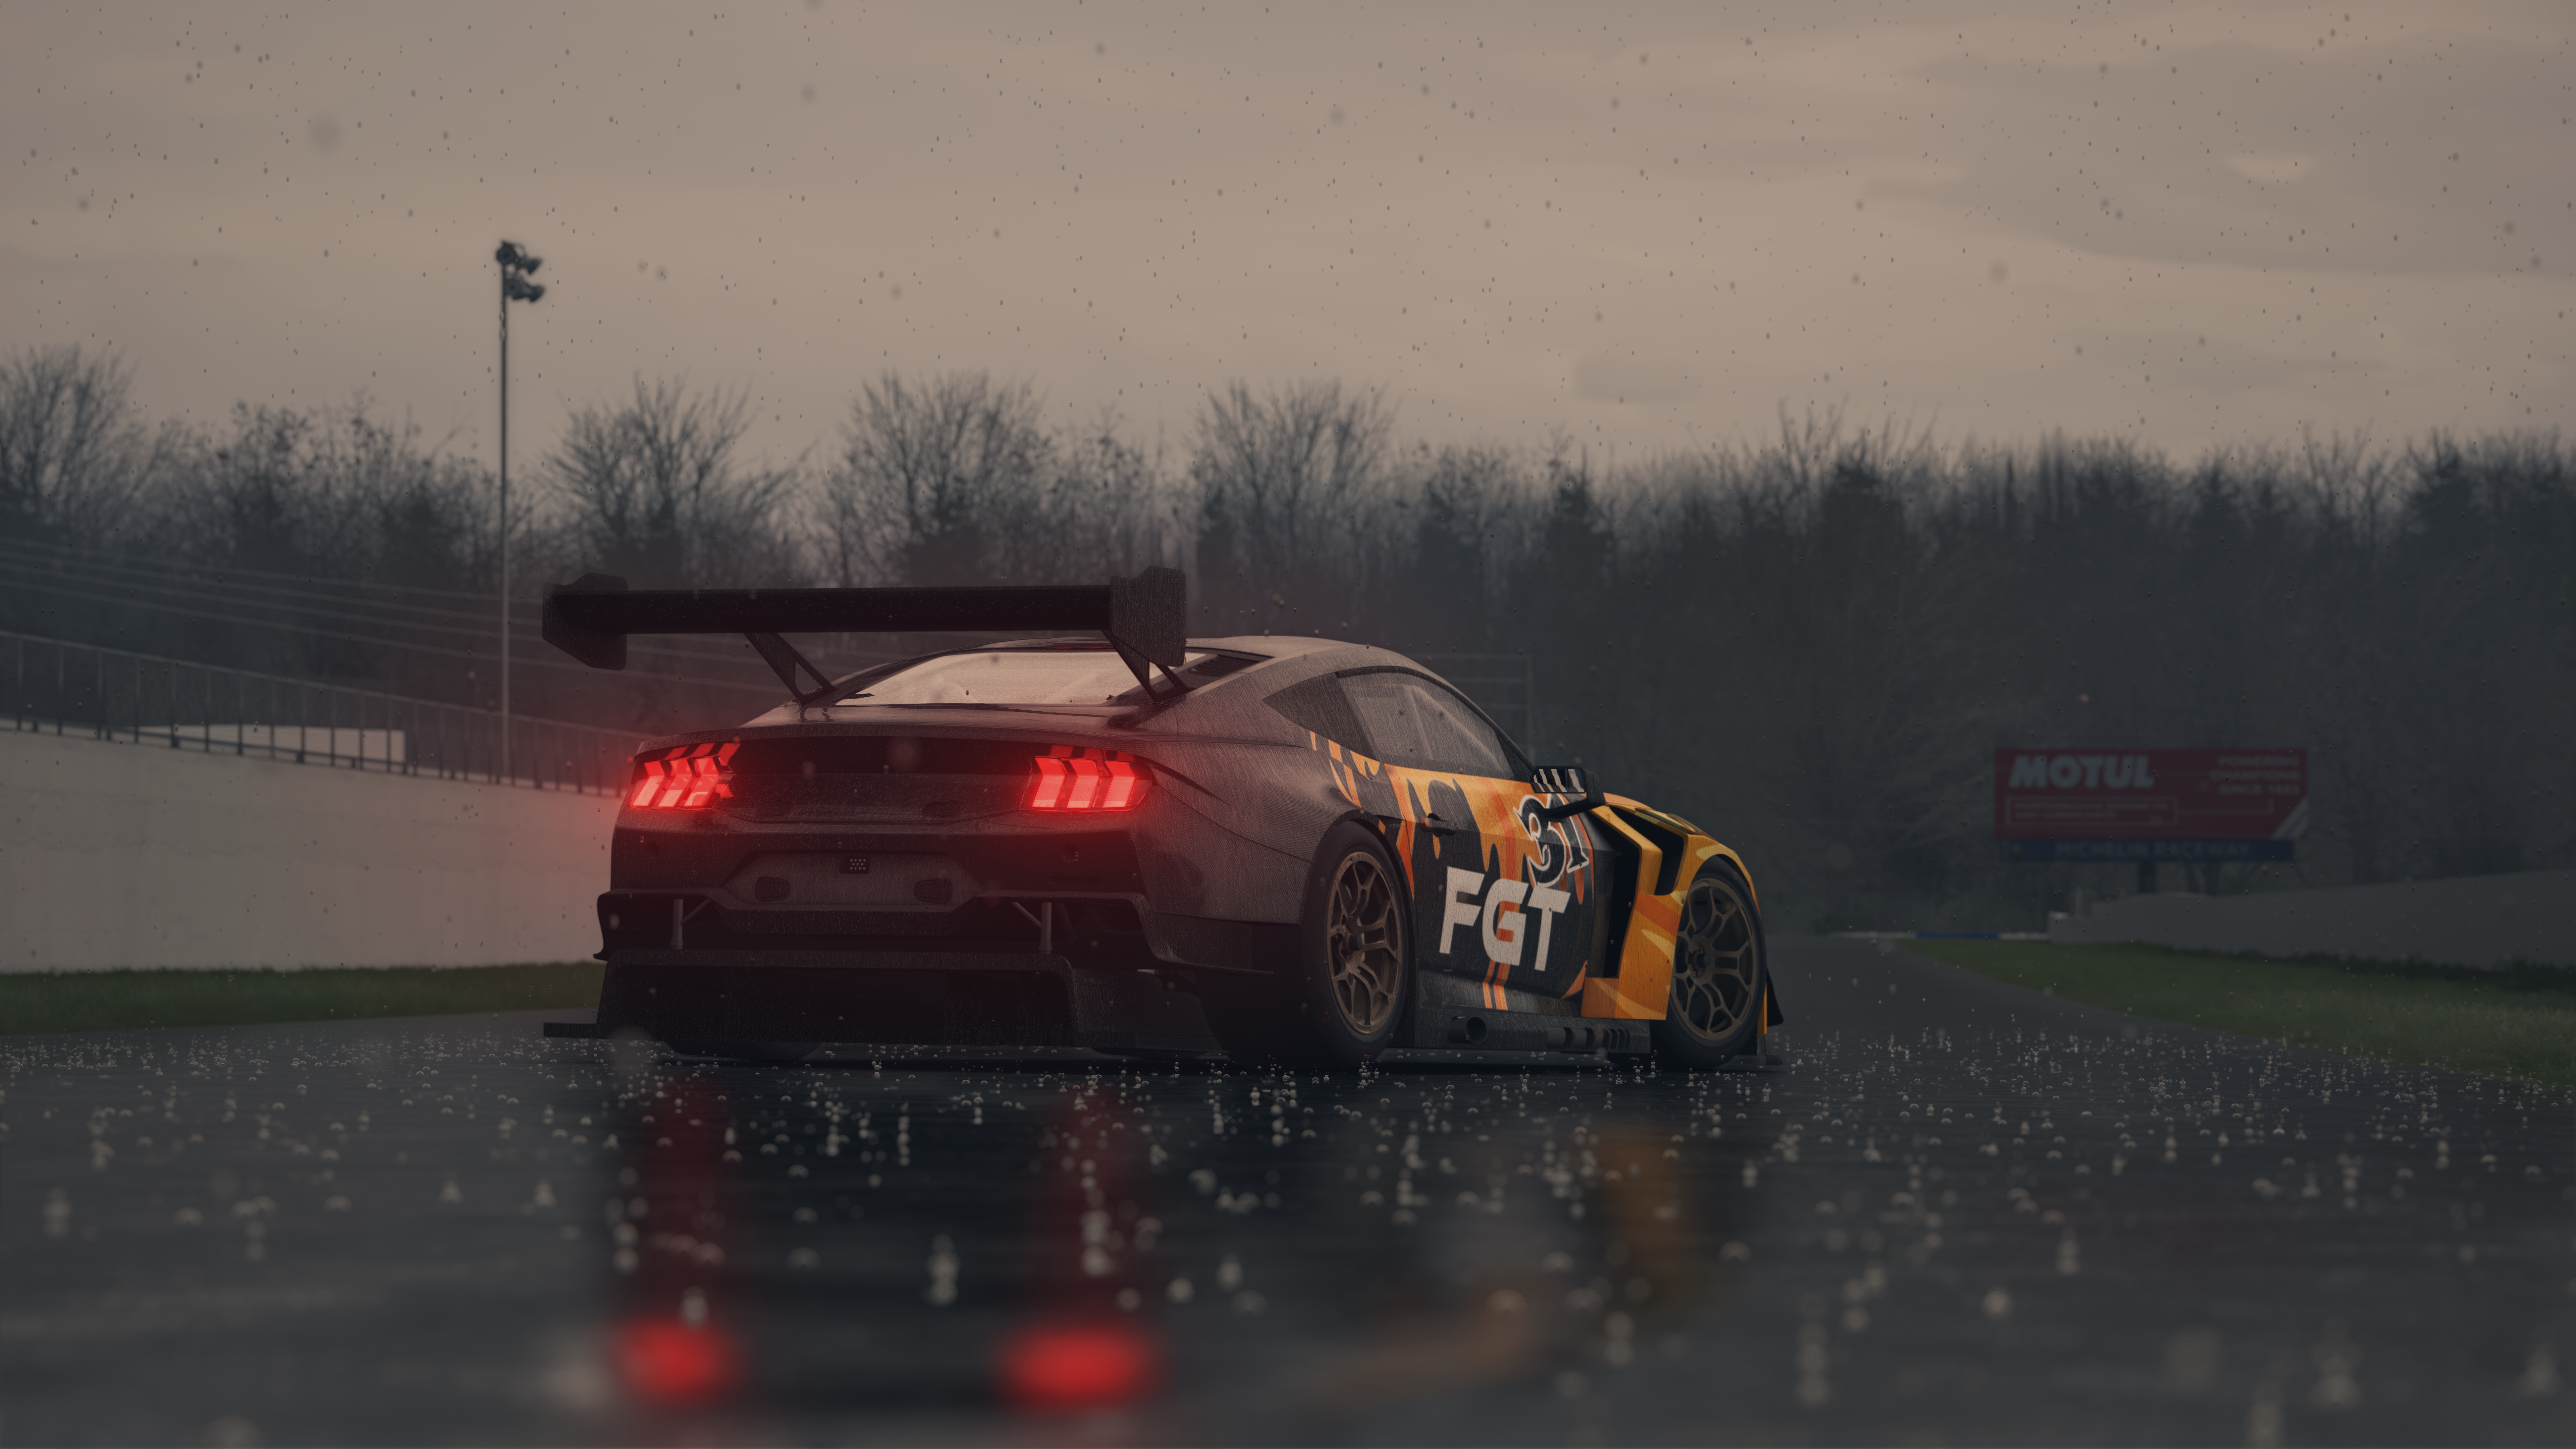 General 7680x4320 Rainydays Assetto Corsa Ford Mustang PC gaming video games digital art low light taillights video game art screen shot rear view reflection overcast wet car trees race tracks rain vehicle CGI